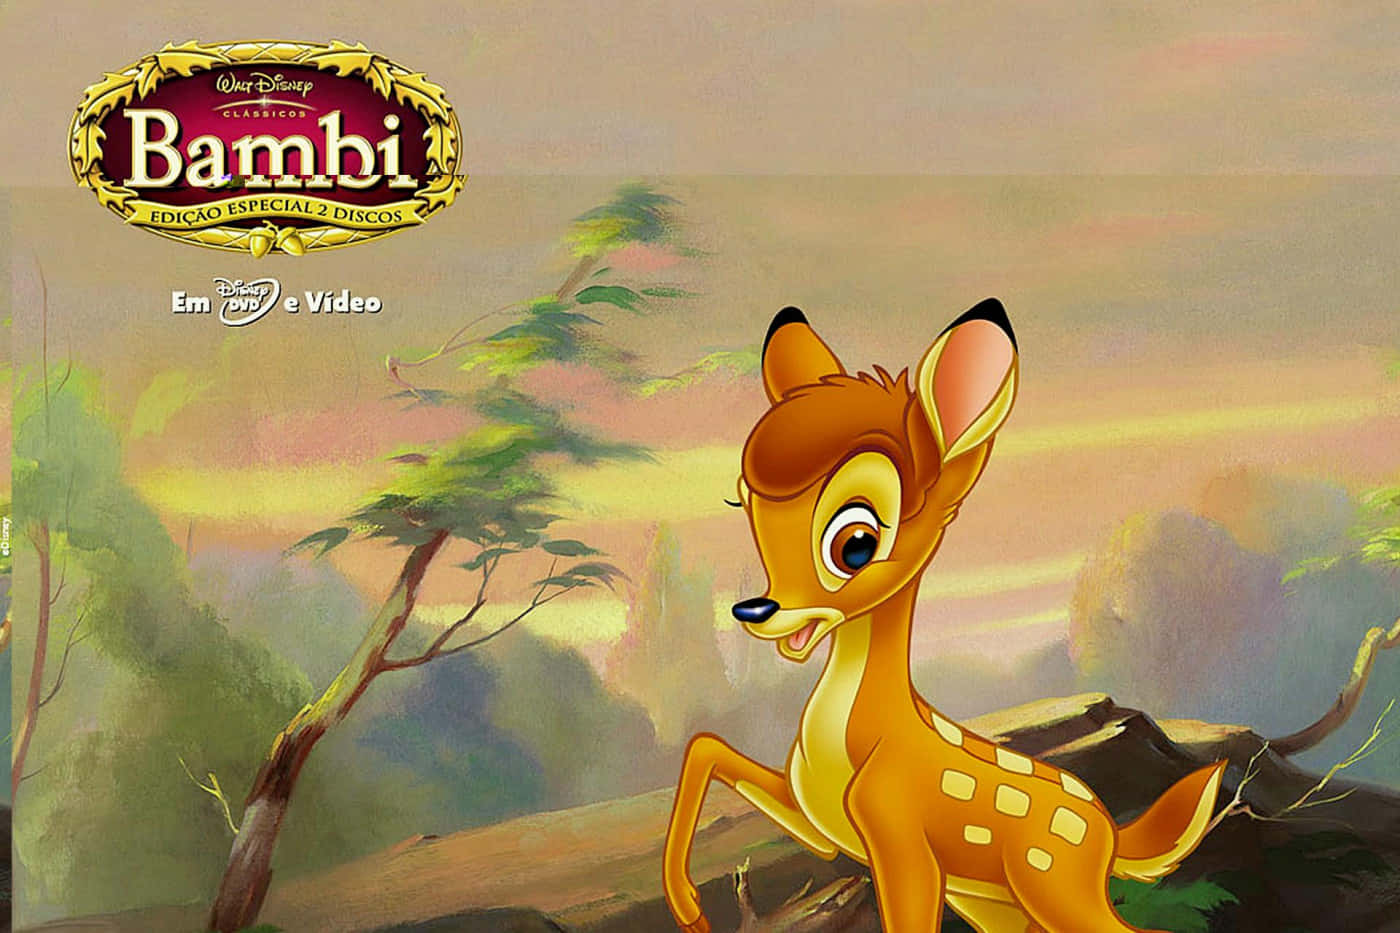 "A beautiful day in the forest with Bambi and his deer friends"